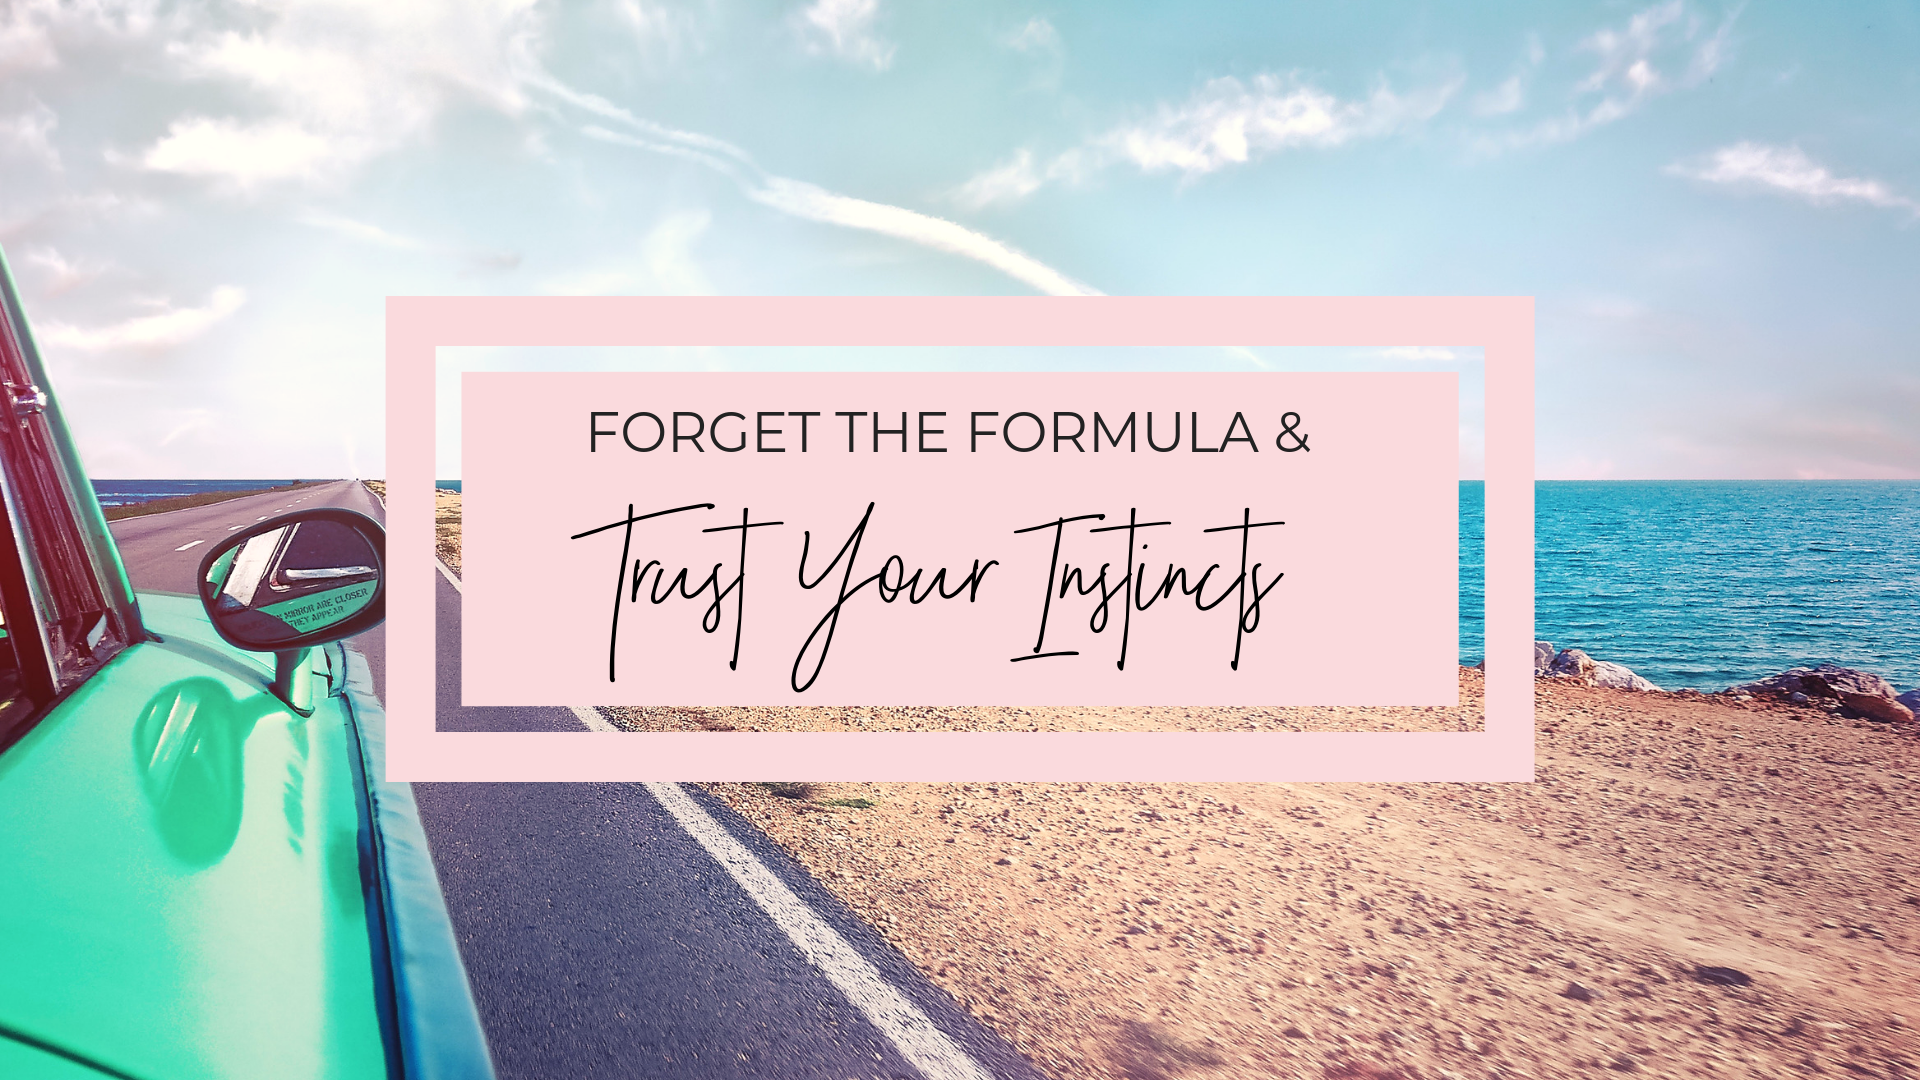 Forget The Formula & Trust Your Instincts